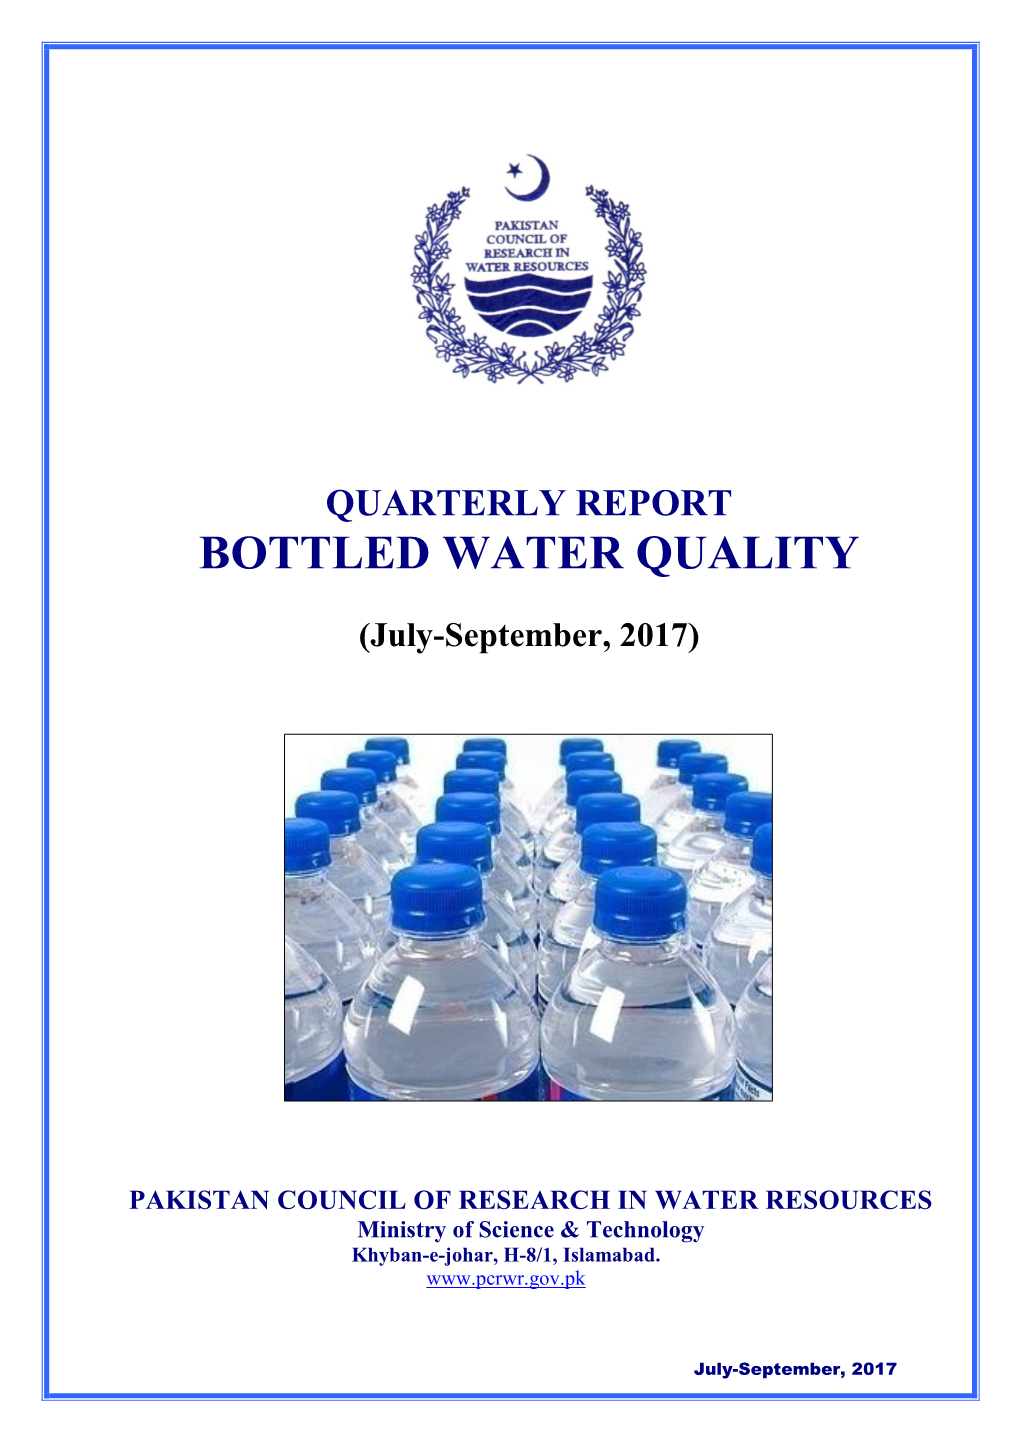 Bottled Water Quality